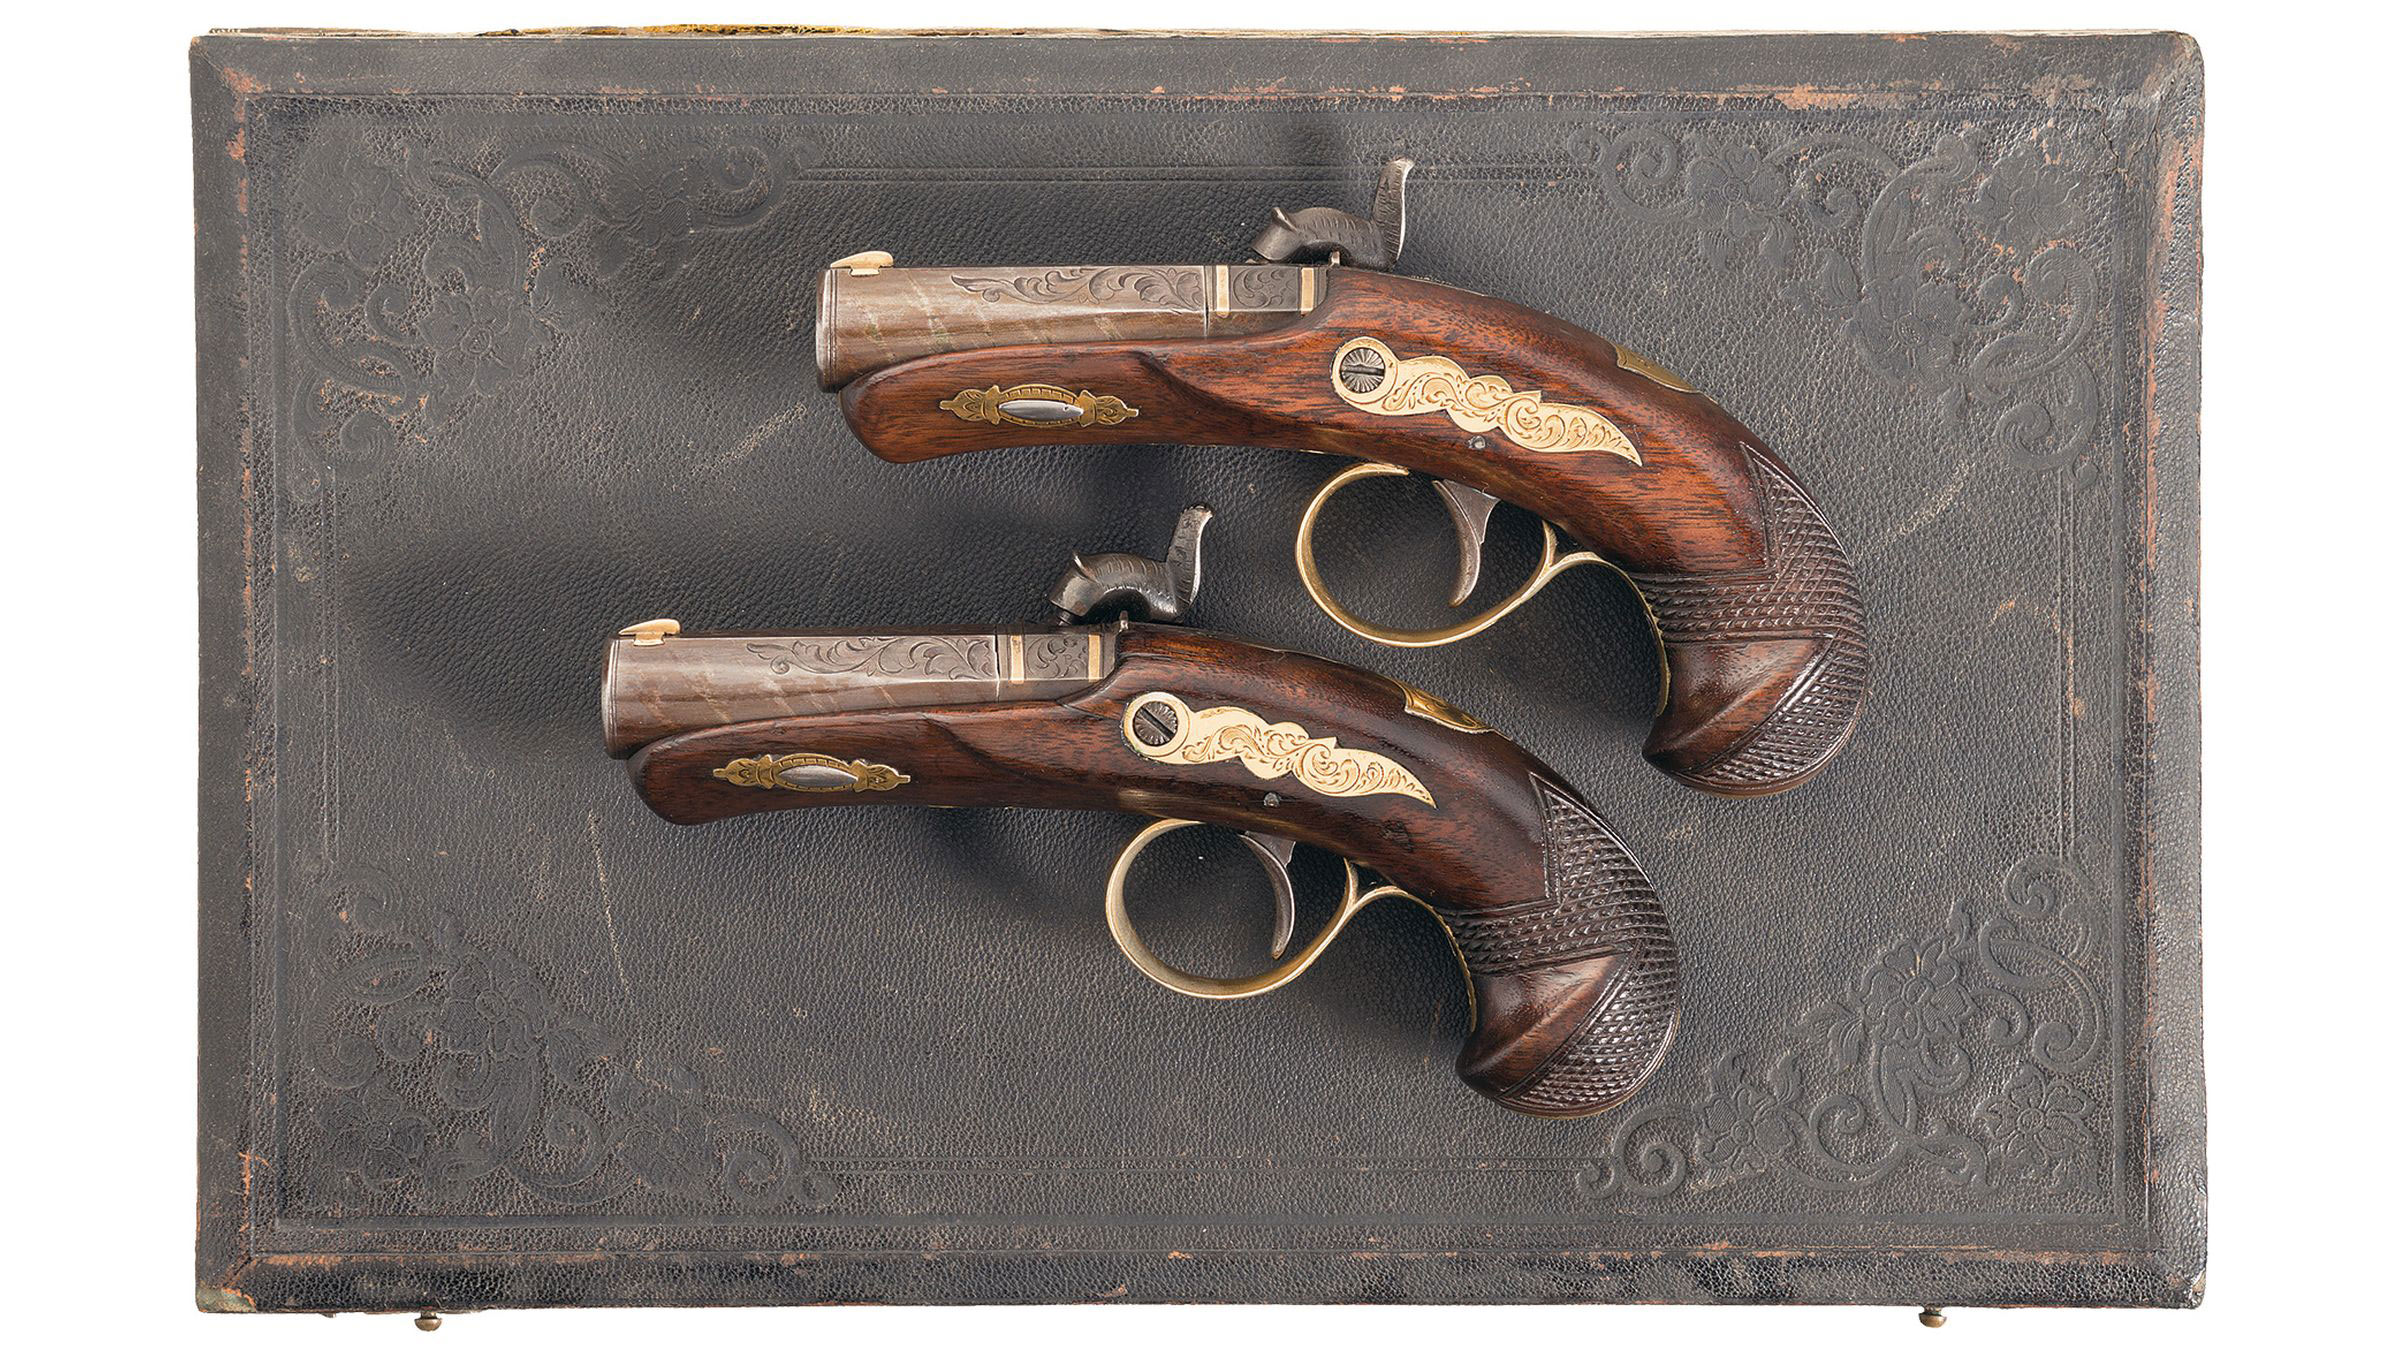 Cased Pair of Gold Accented Deringer Percussion Pocket Pistols